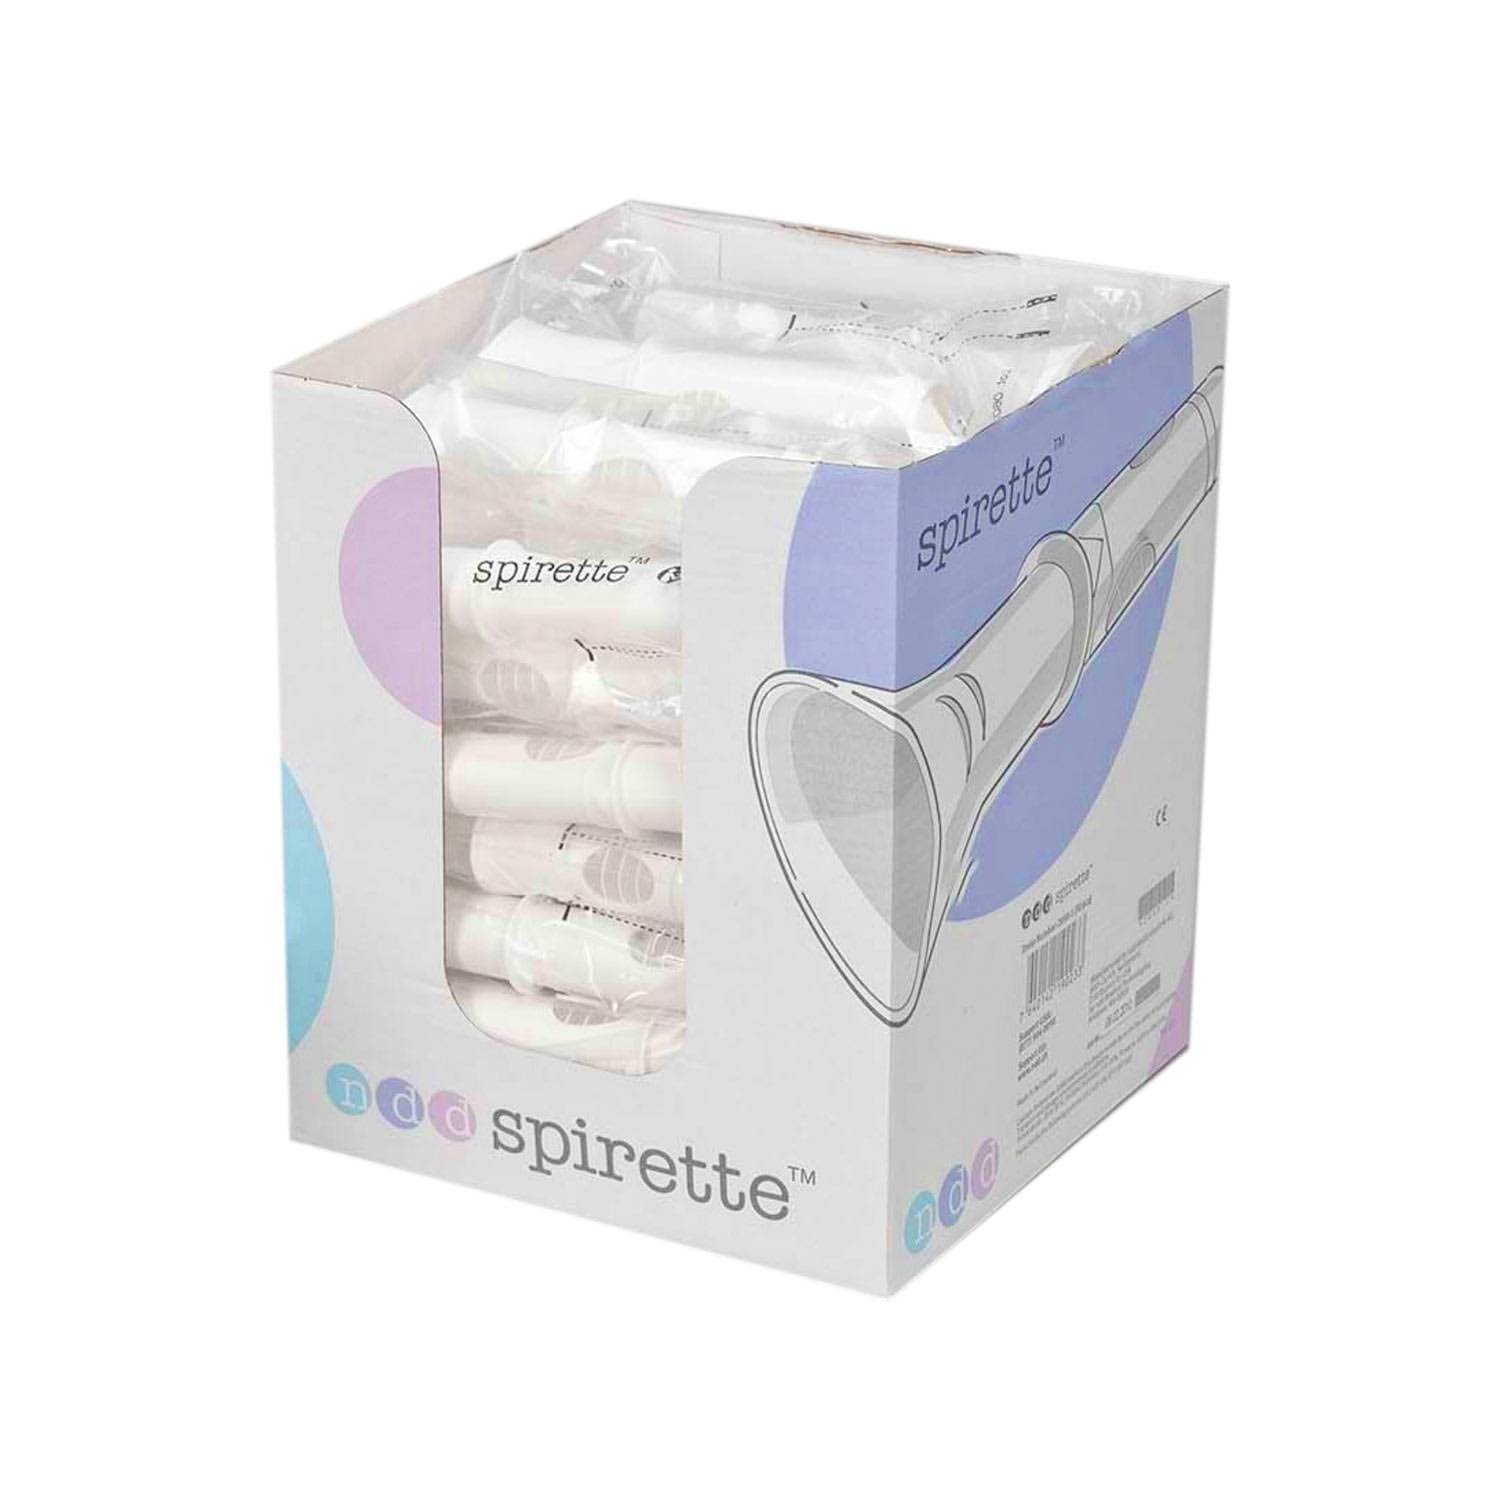 NDD Spirette Mouthpiece For The Easy on-PC Spirometer - 50 Piece